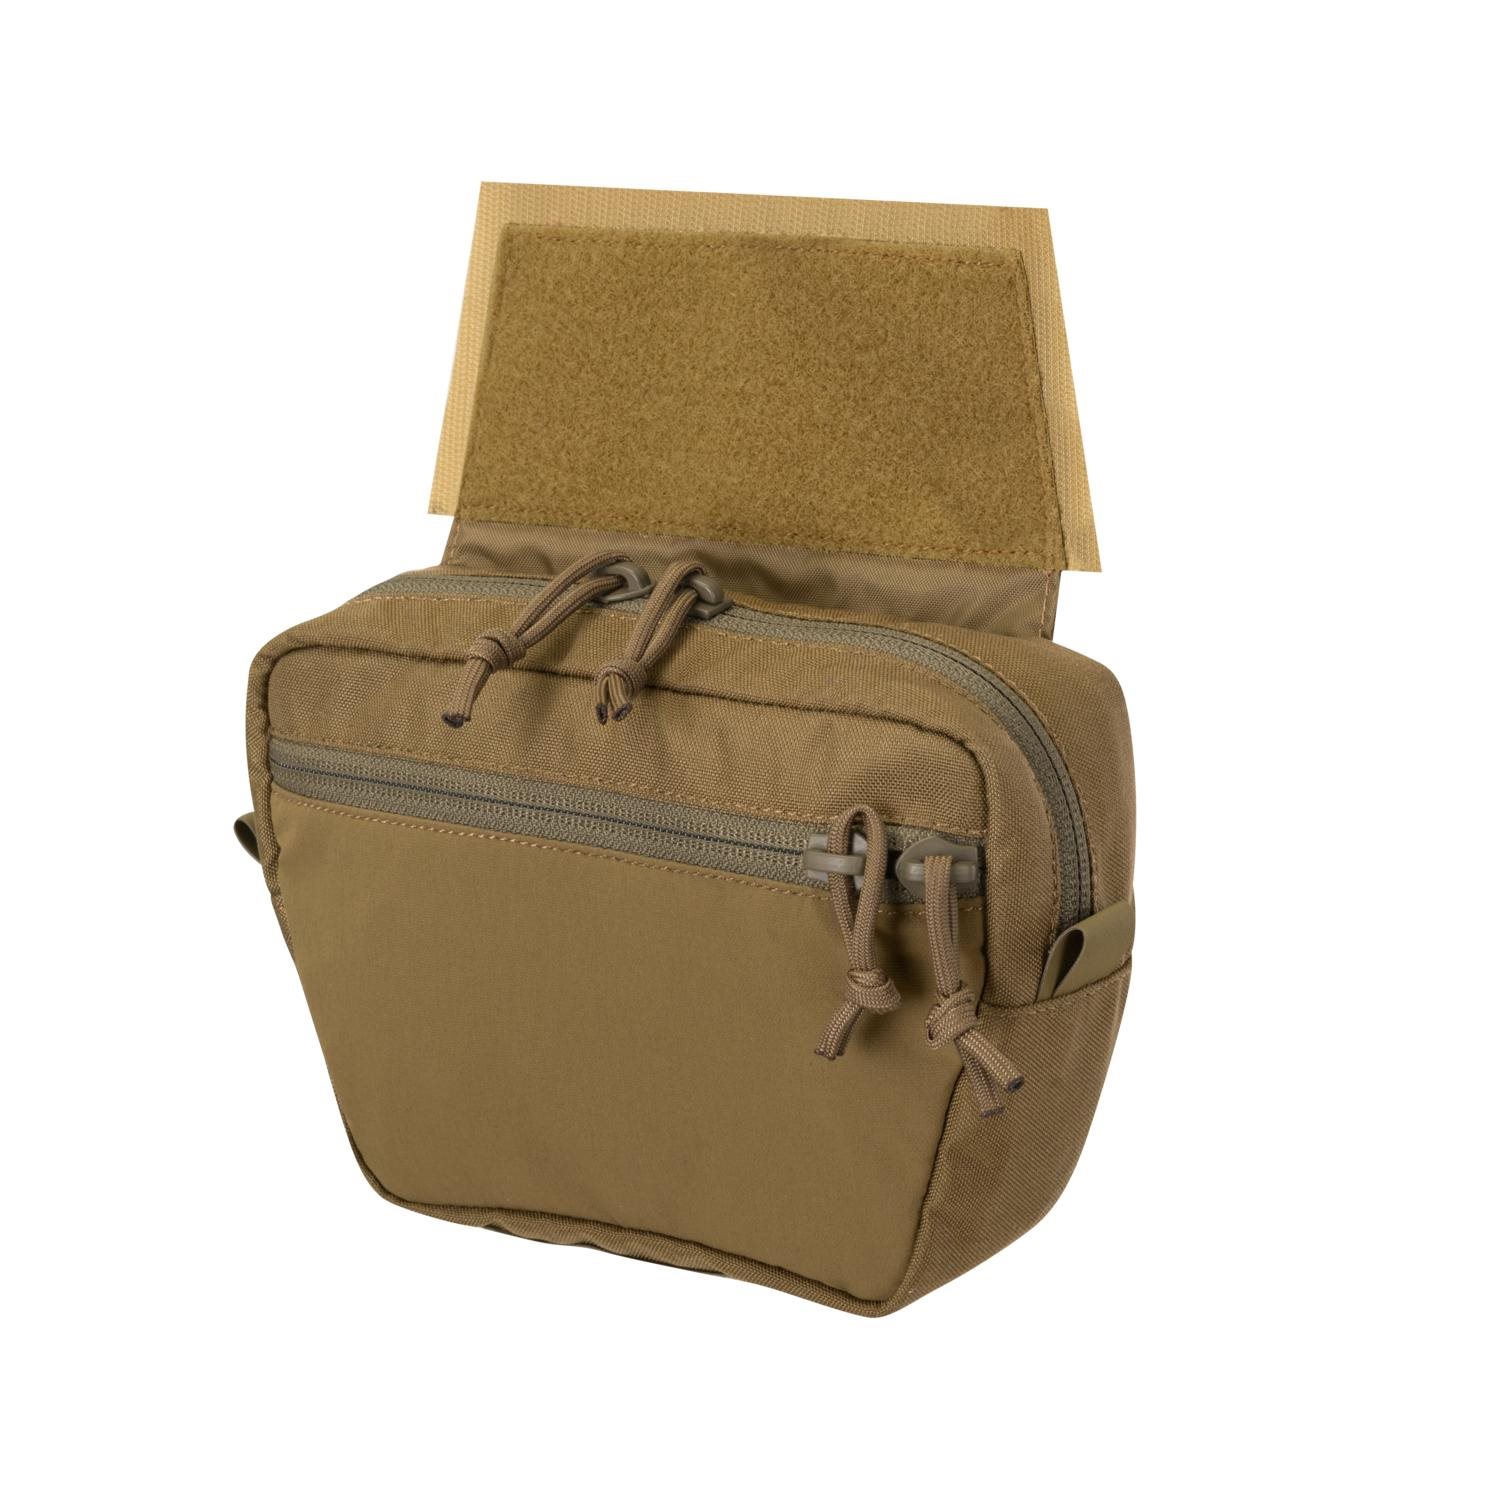 DIRECT ACTION Underpouch LIGHT COYOTE BROWN | MILITARY RANGE